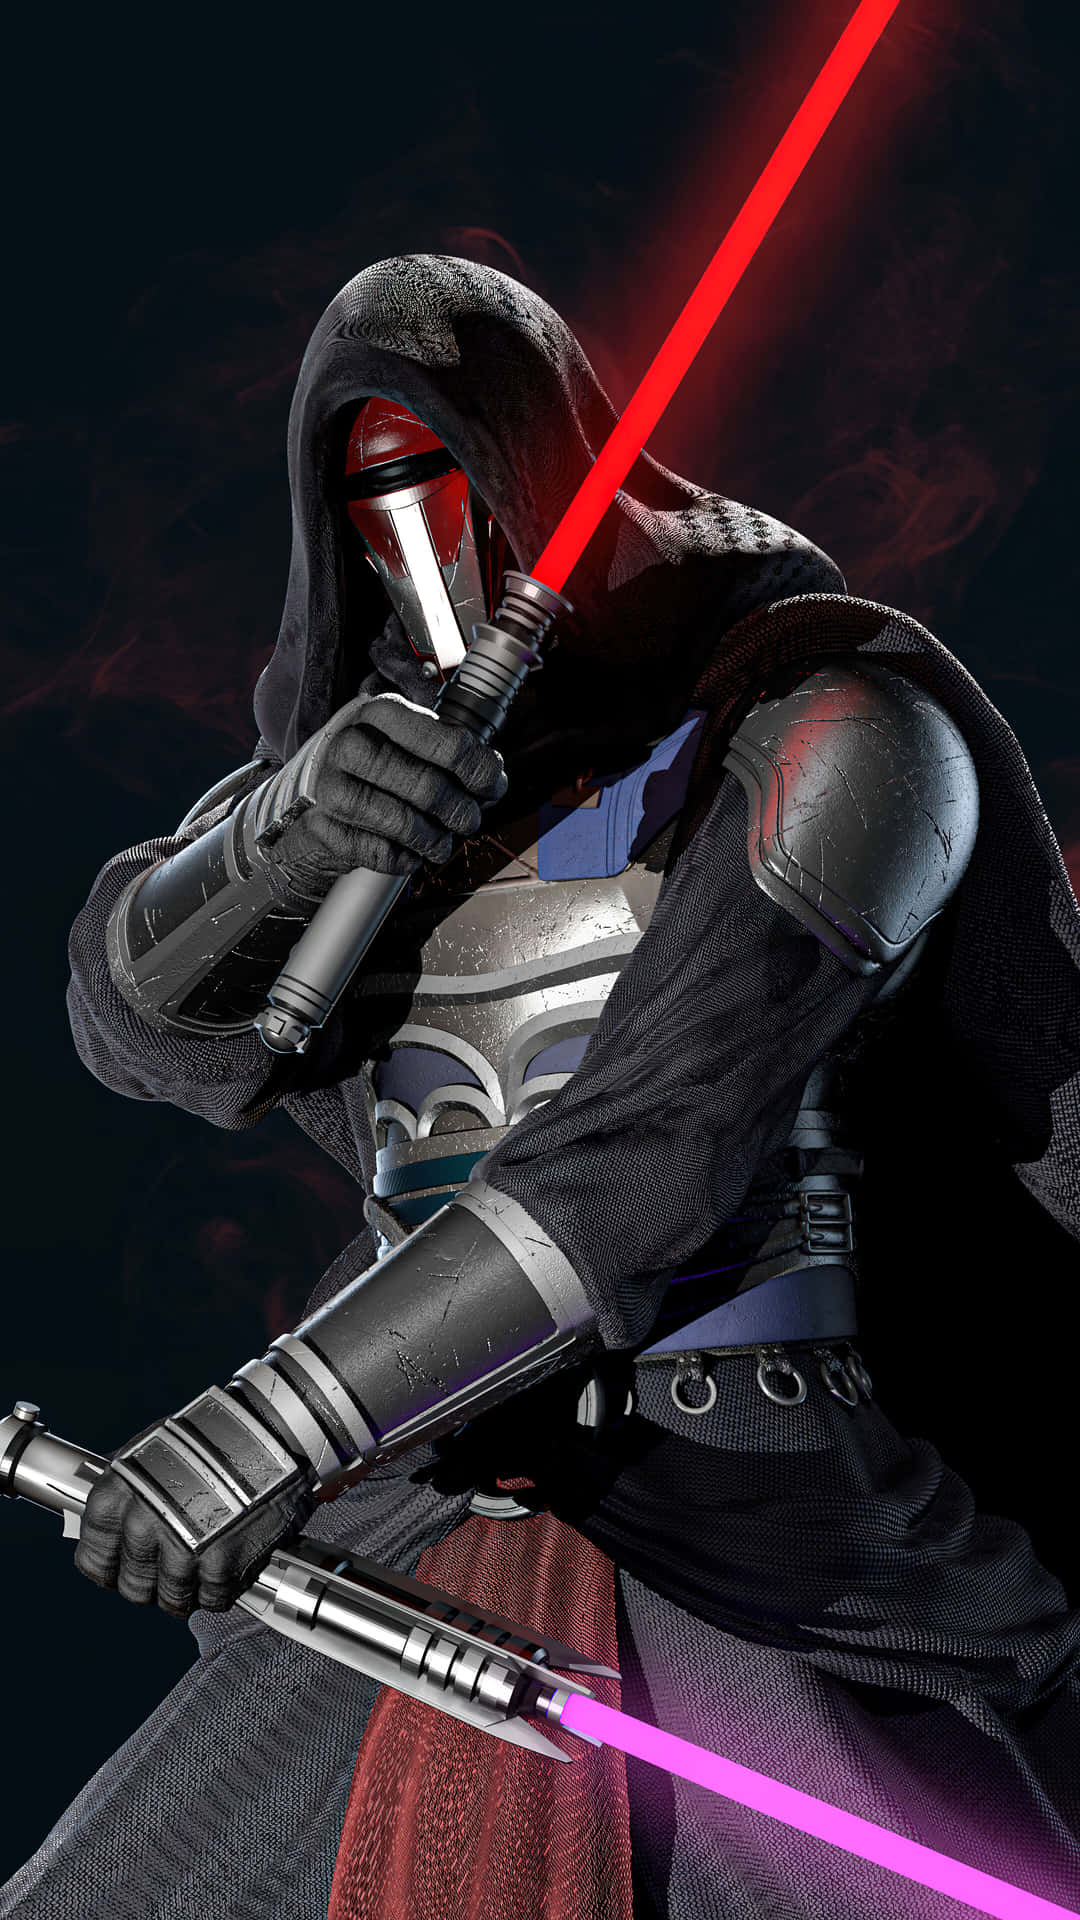 "Darth Revan, the iconic Sith Lord from Star Wars" Wallpaper